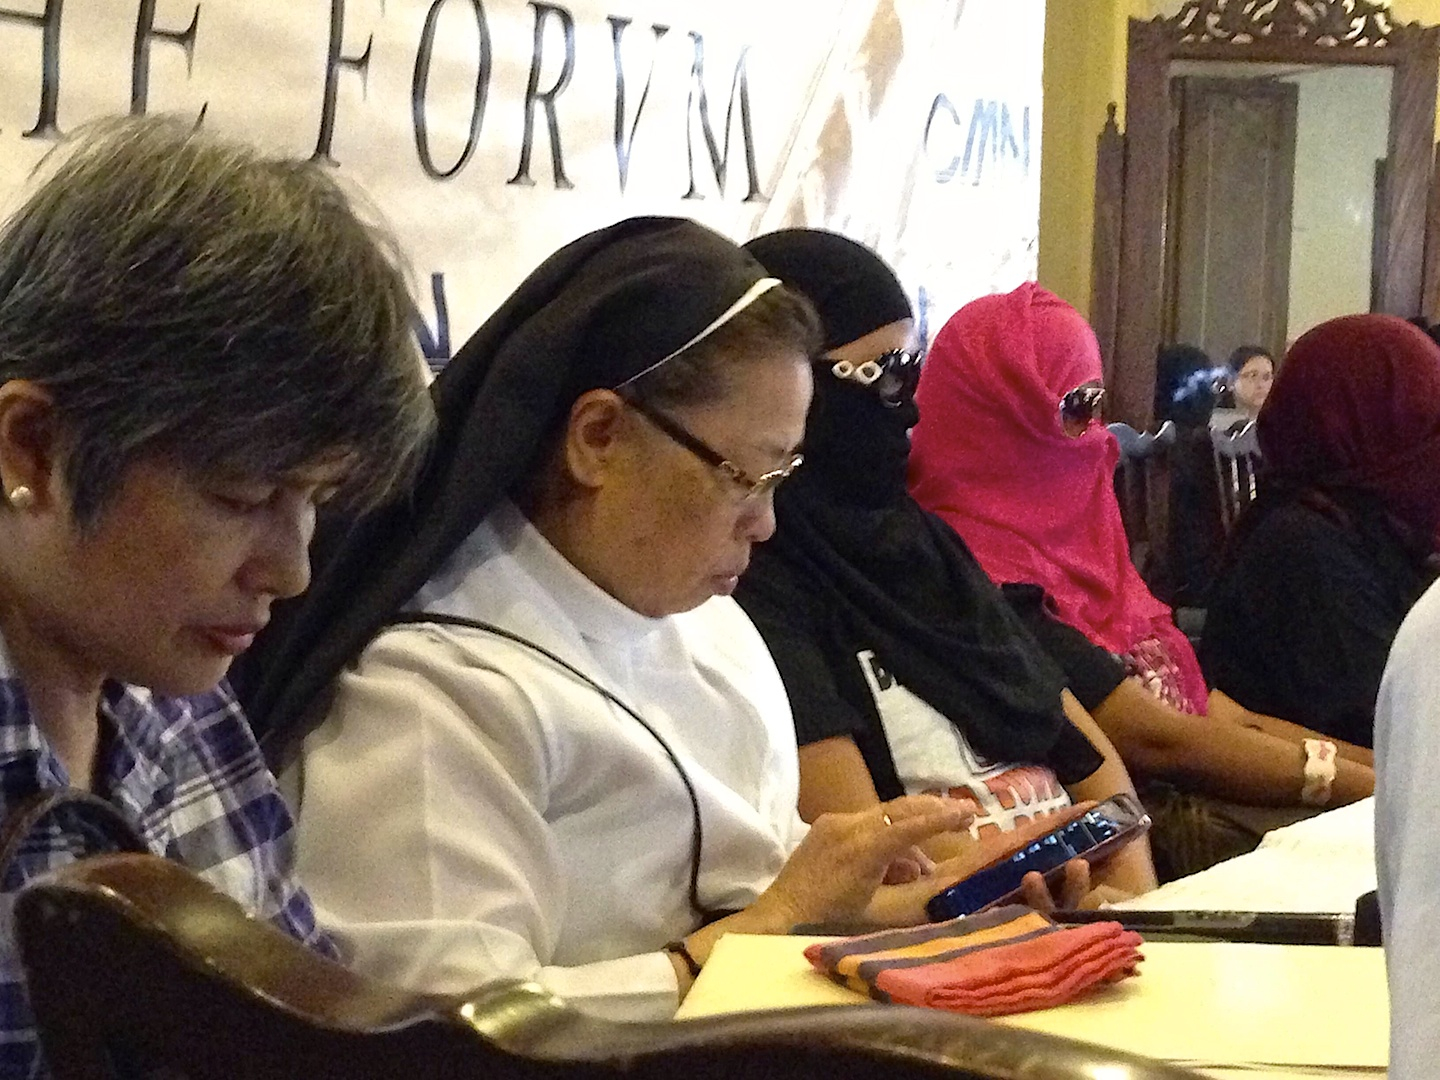 Benedictine Sr. Mary John Mananzan, OSB, takes notes during the sharing on abuse distressed Filipino house help allegedly suffered while working and after fleeing abusive employers at a forum here Feb. 18.  (N.J. Viehland)